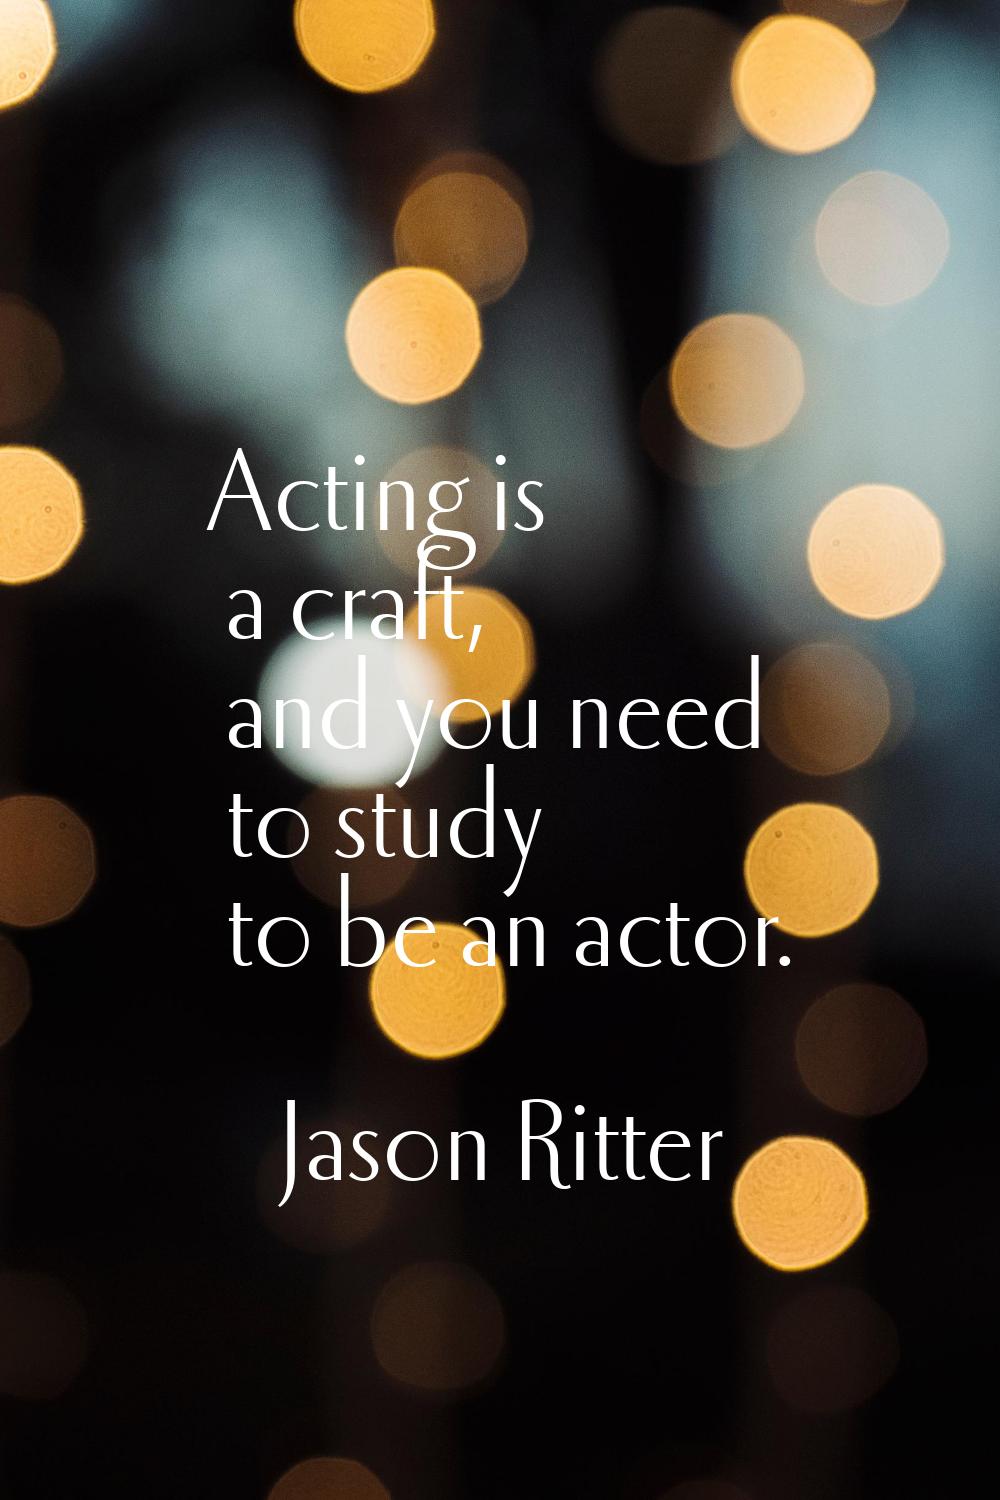 Acting is a craft, and you need to study to be an actor.